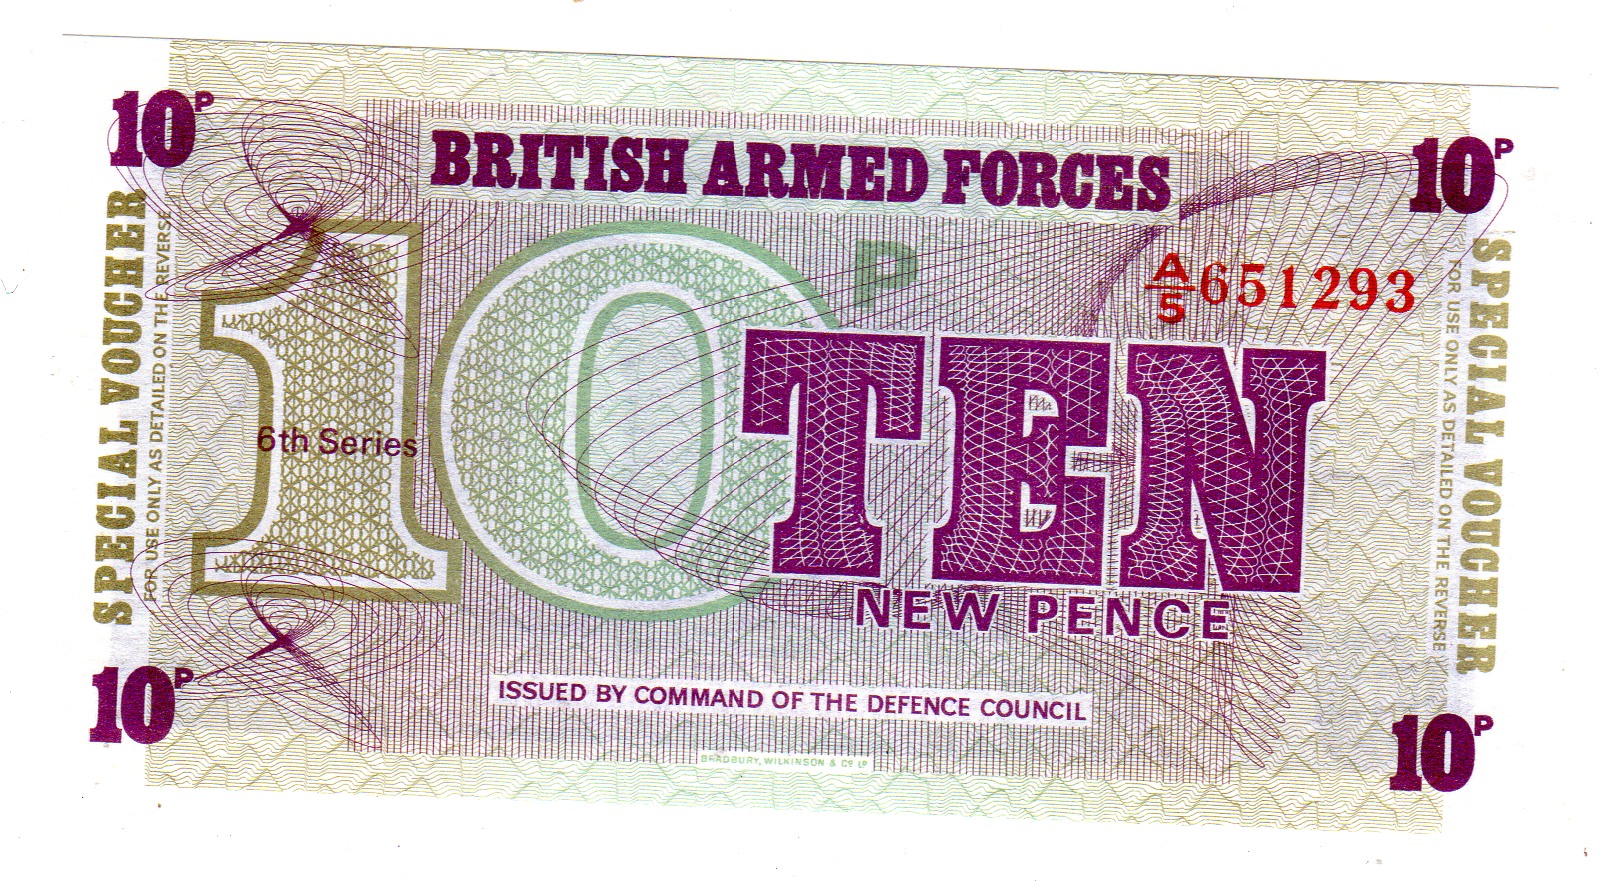 Ten new pence british armed forces 6 serie